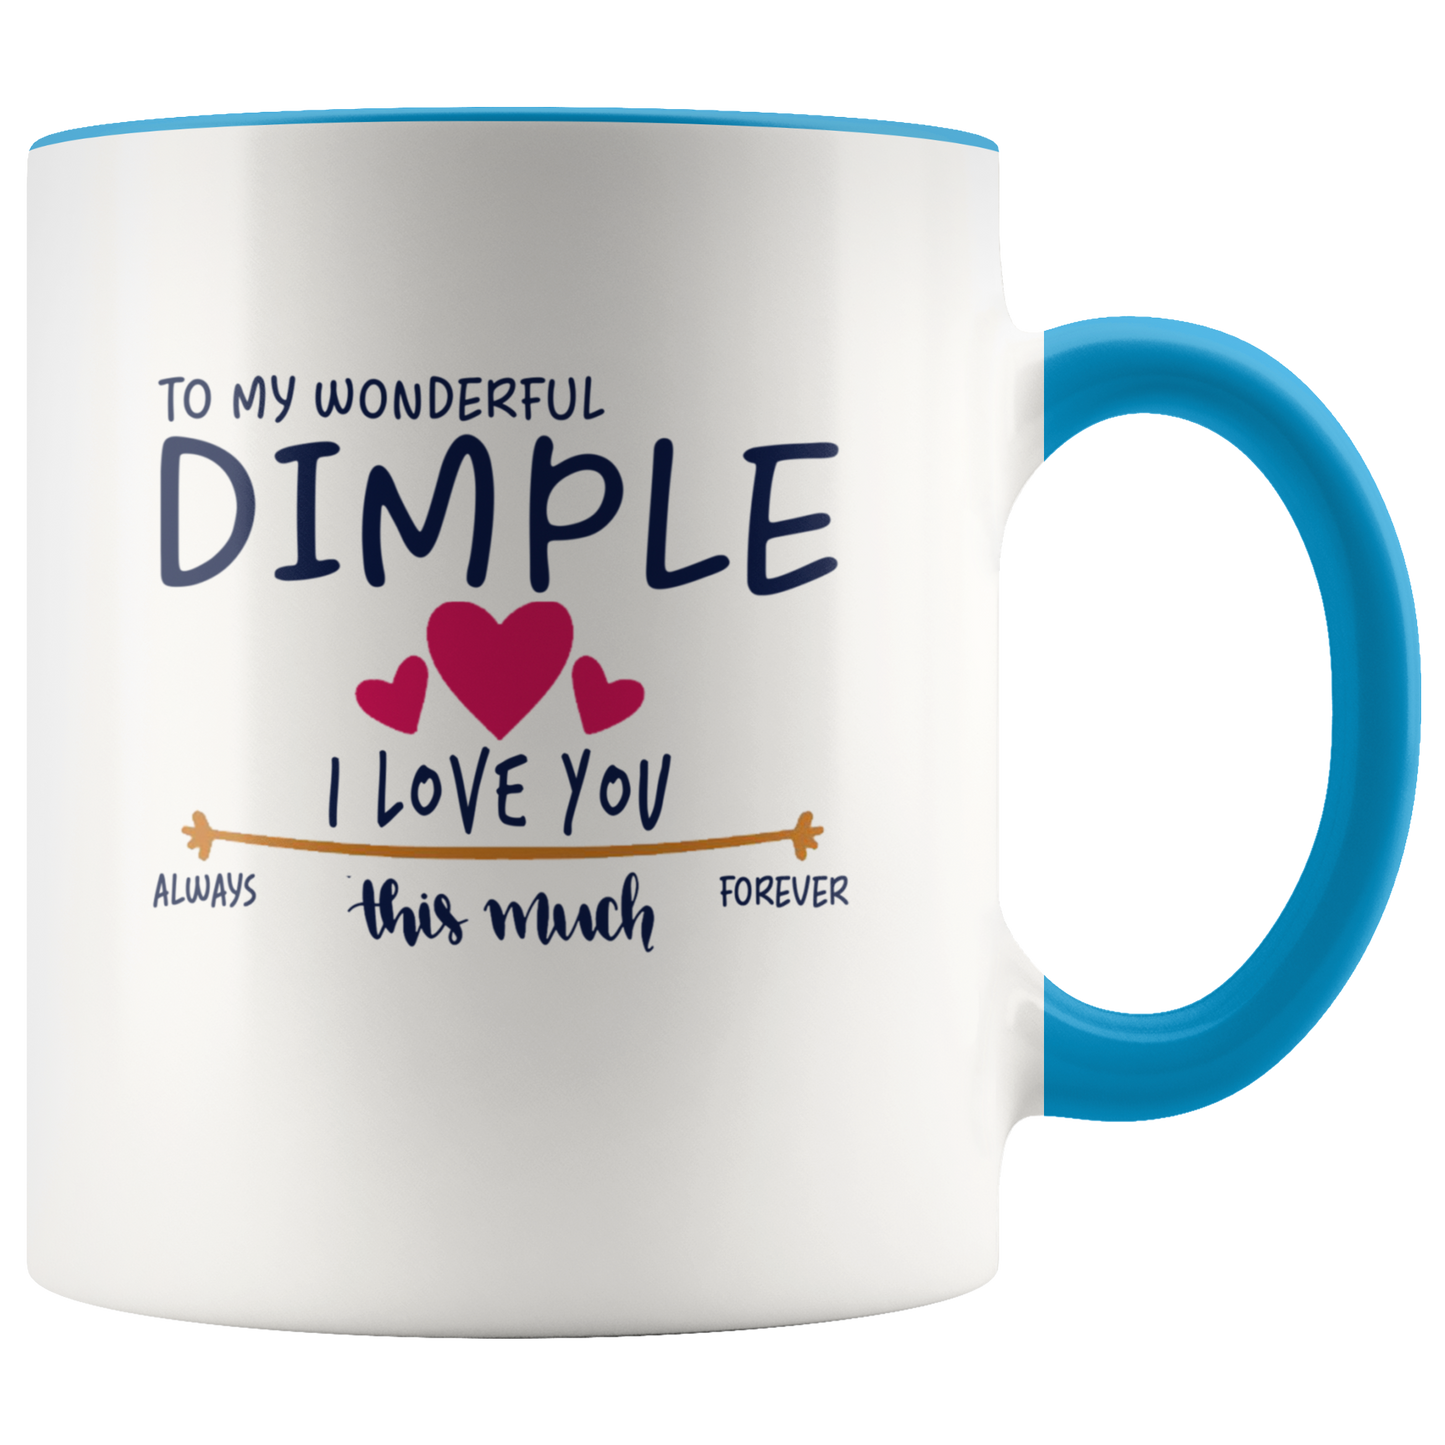 M-21260451-sp-23306 - Valentines Day Coffee Mug With Name Dimple - To My Wonderful